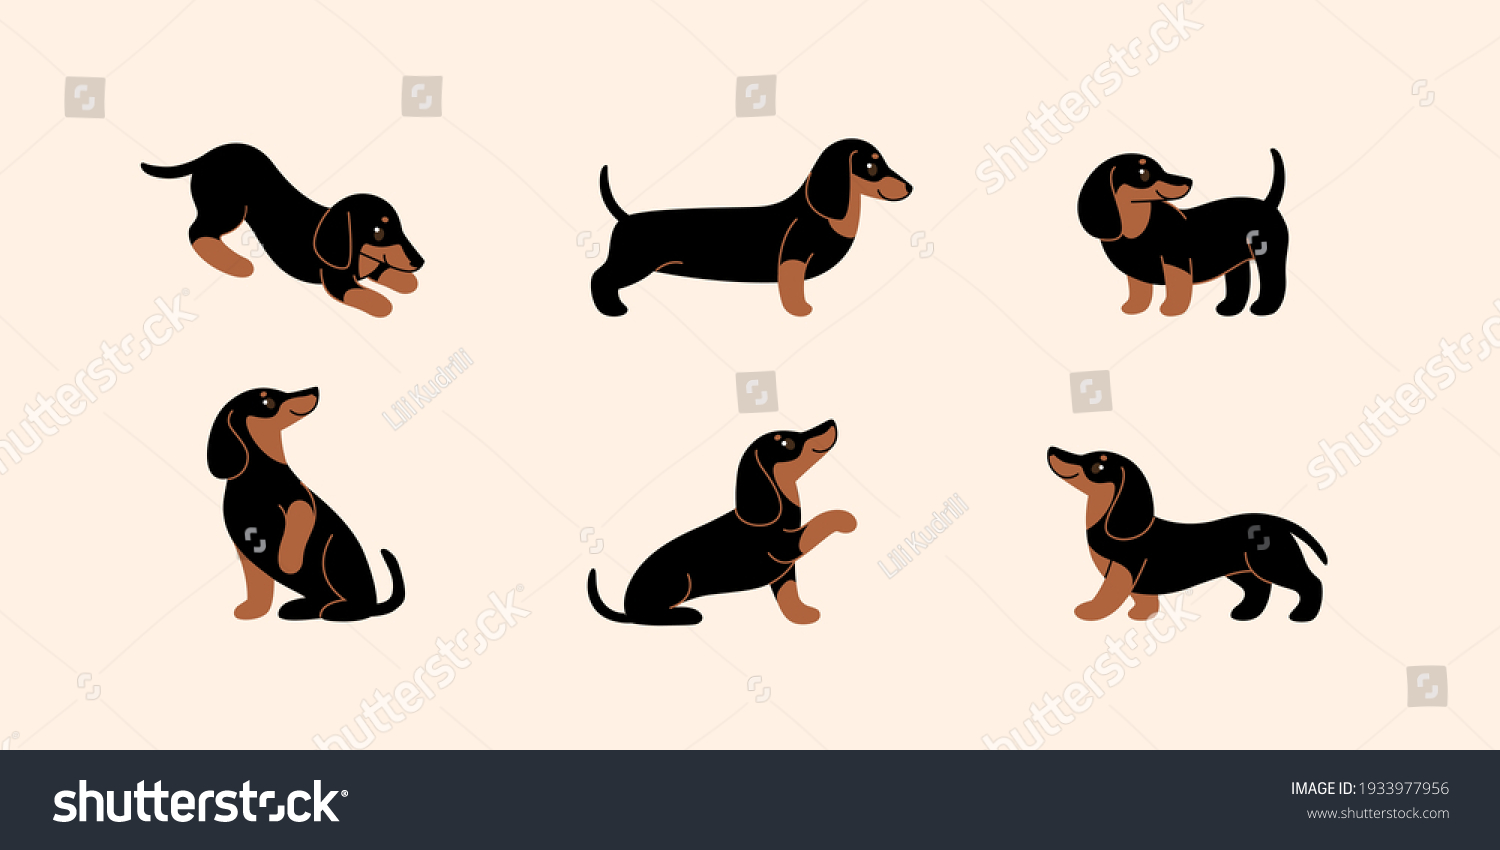 SVG of Cartoon dog icon set. Different poses of dachshund. Vector illustration for prints, clothing, packaging, stickers. svg